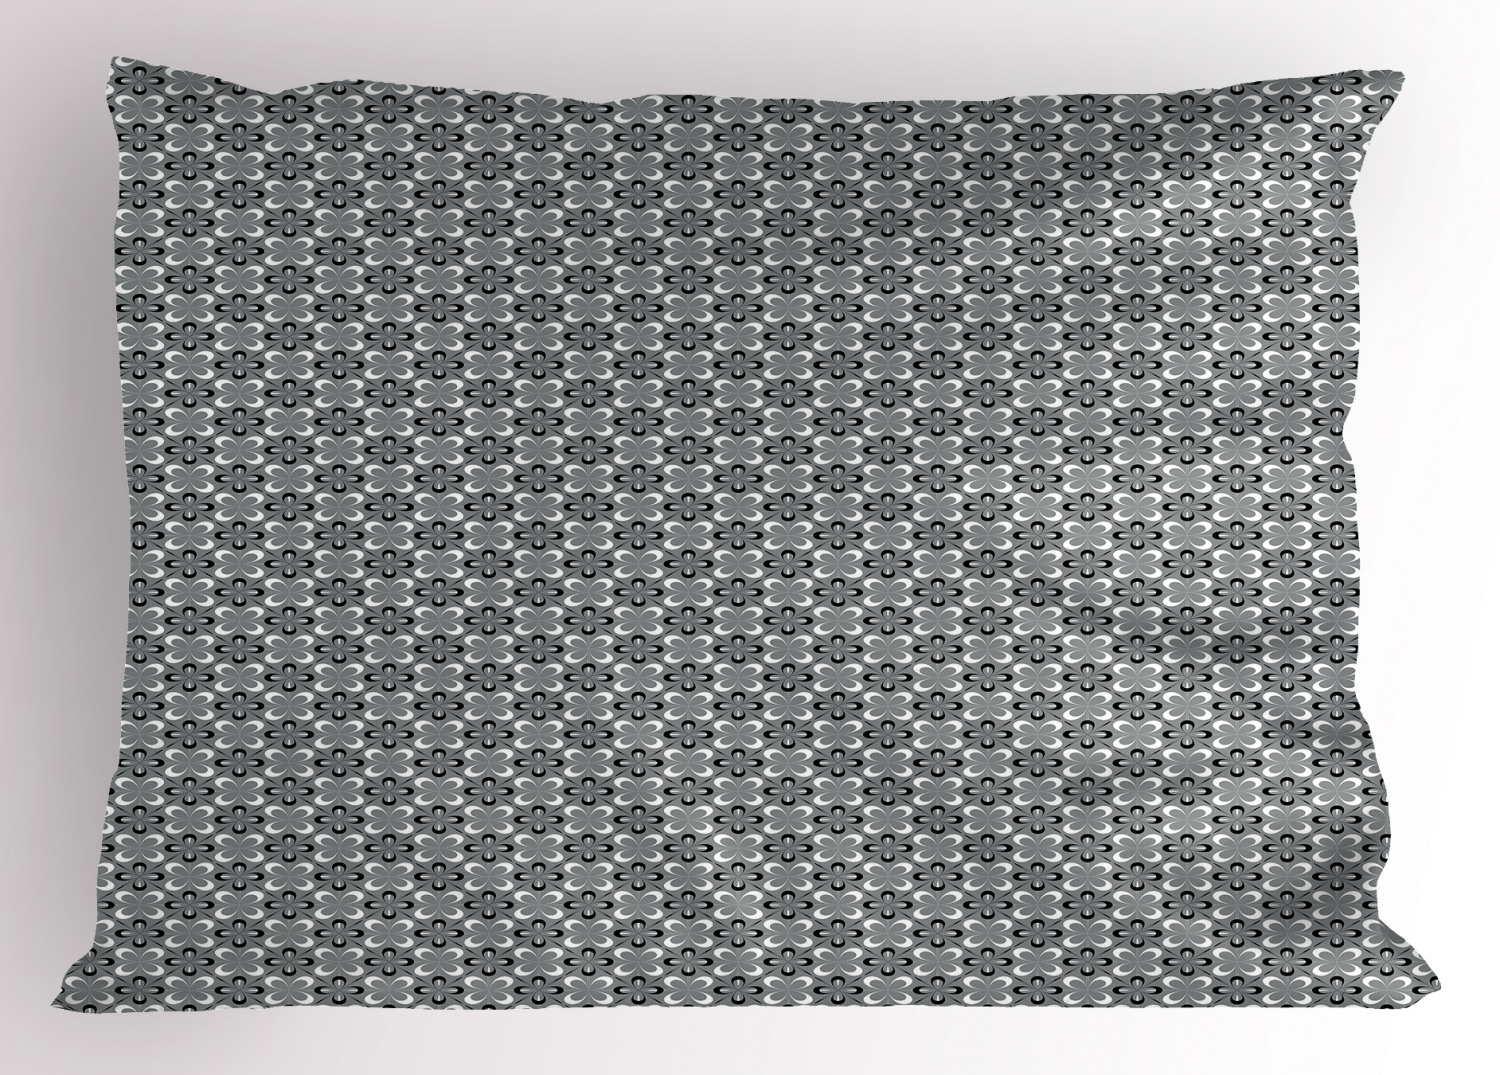 Grey Pillow Sham Decorative Pillowcase 3 Sizes Available for Bedroom Decor 